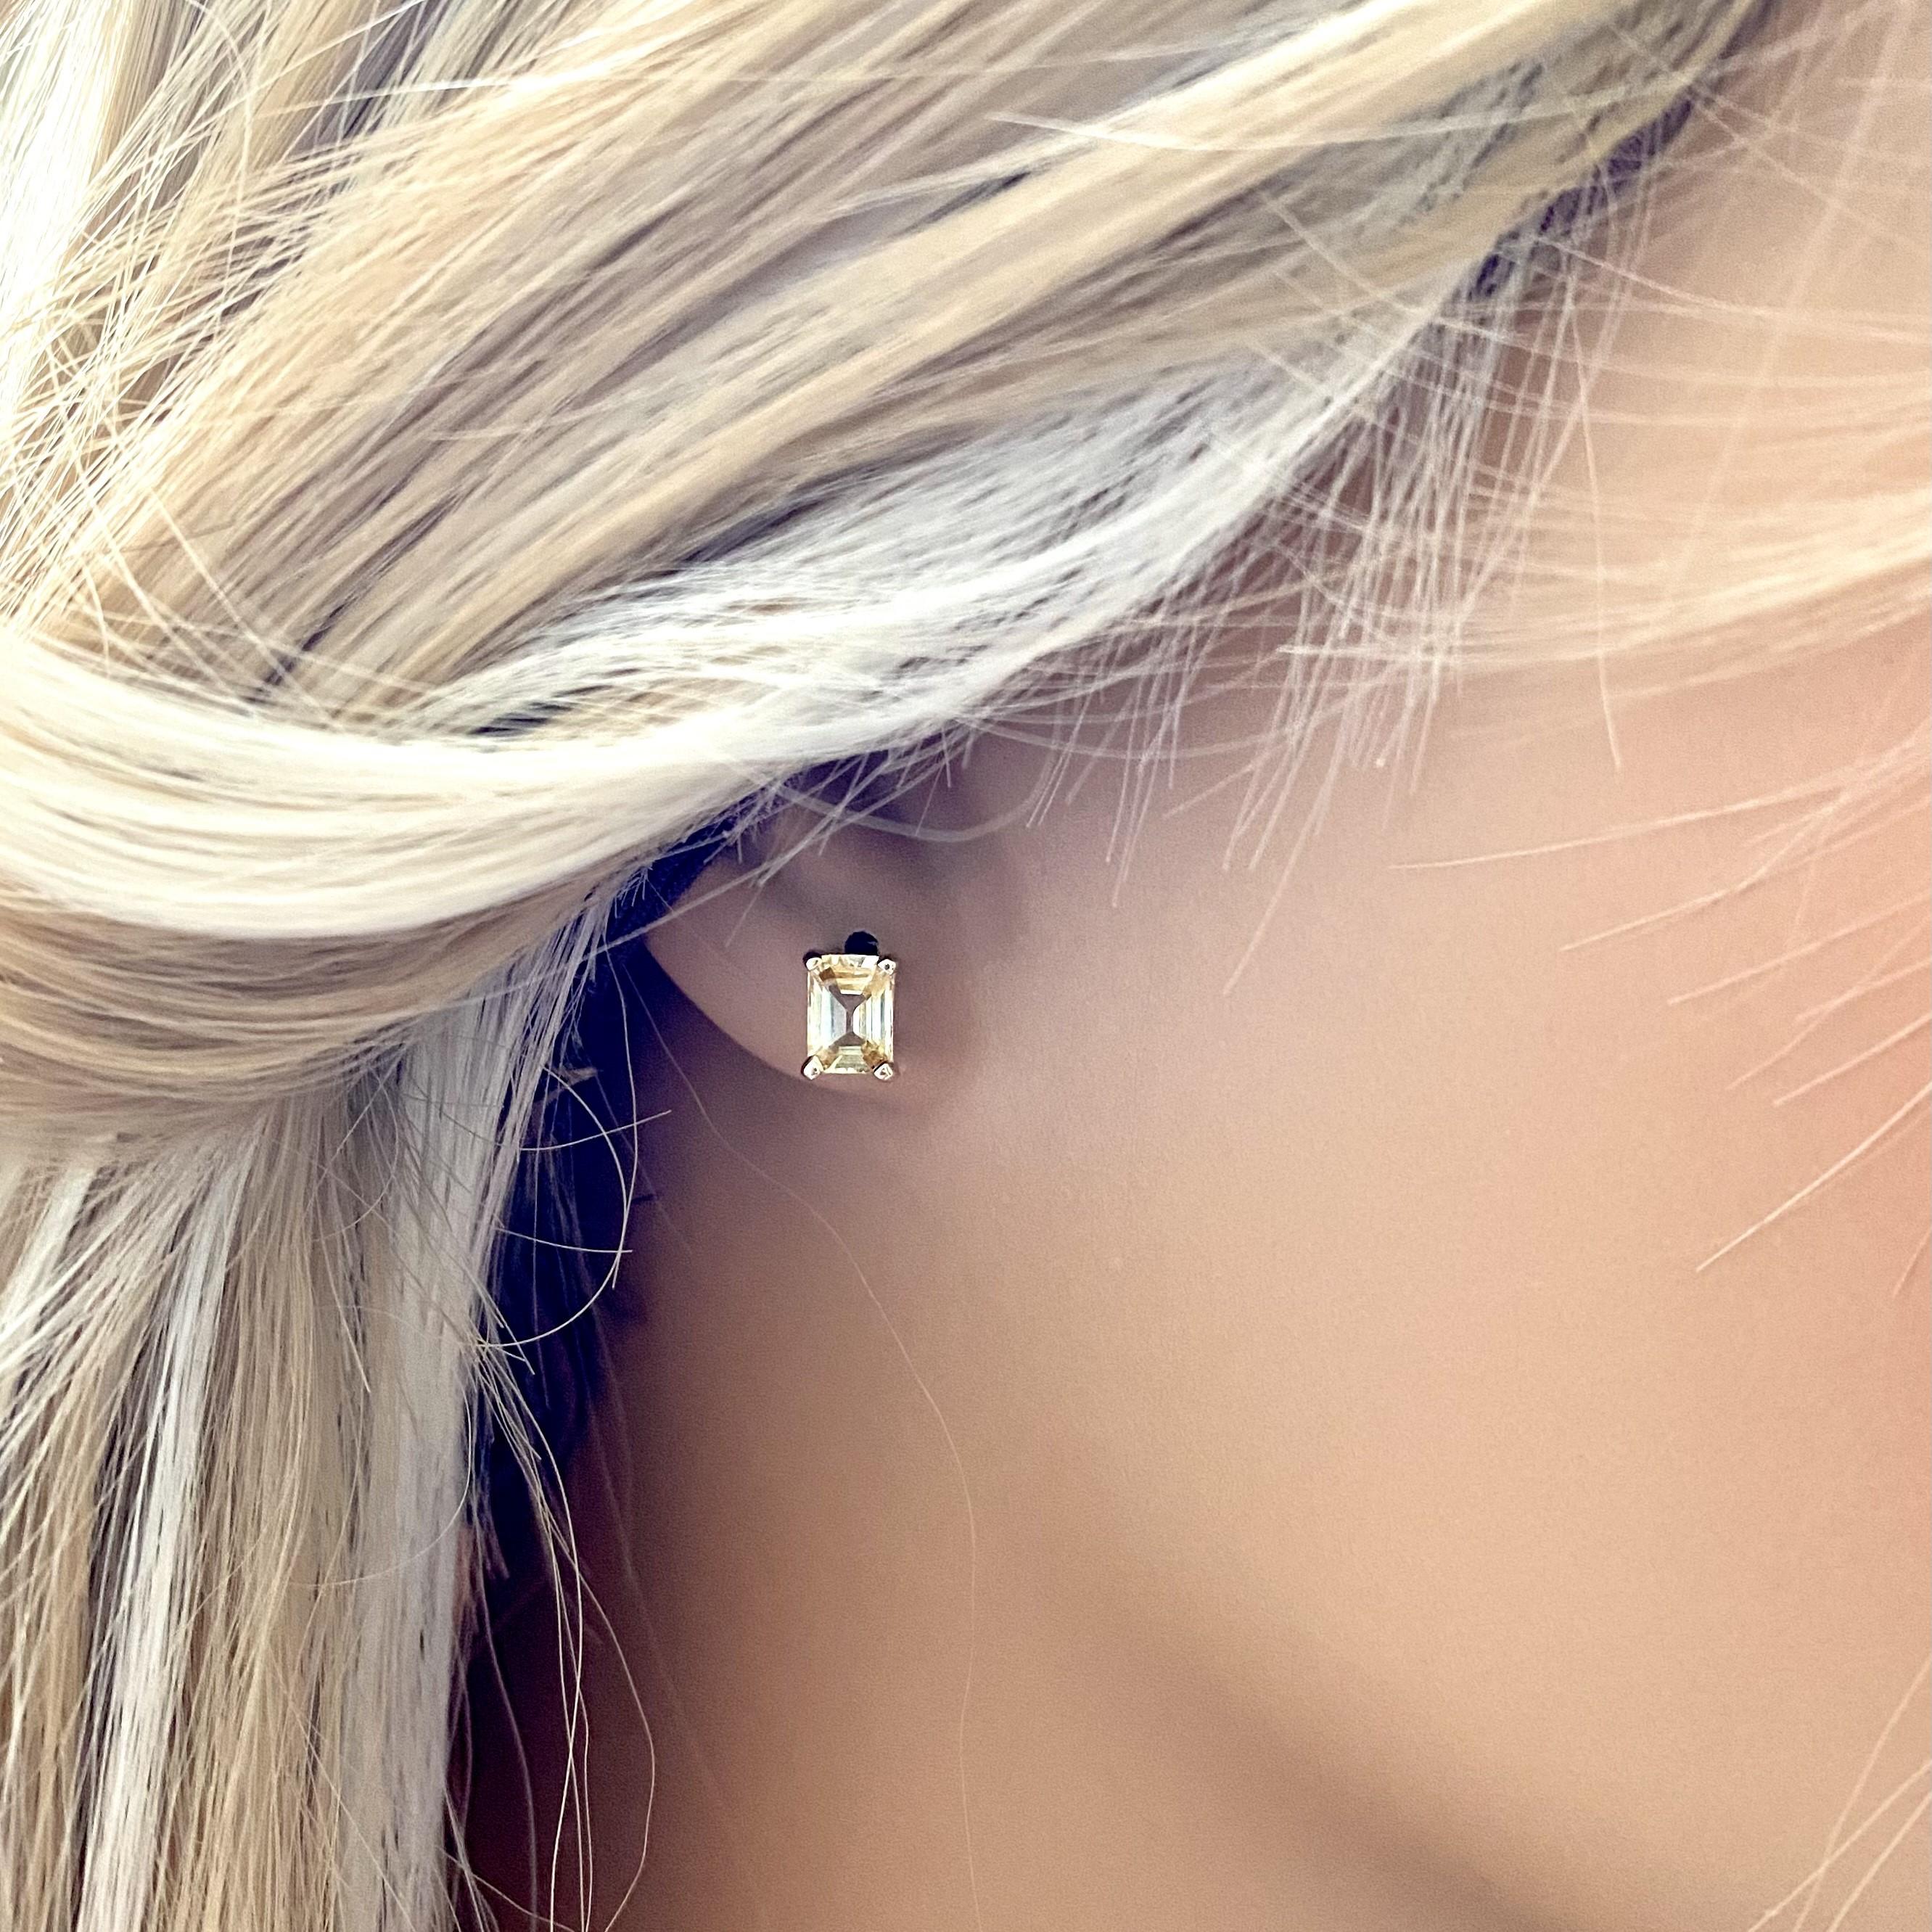 Contemporary Emerald Shaped Ceylon Yellow Sapphire Gold Stud Earrings Weighing 1.70 Carats